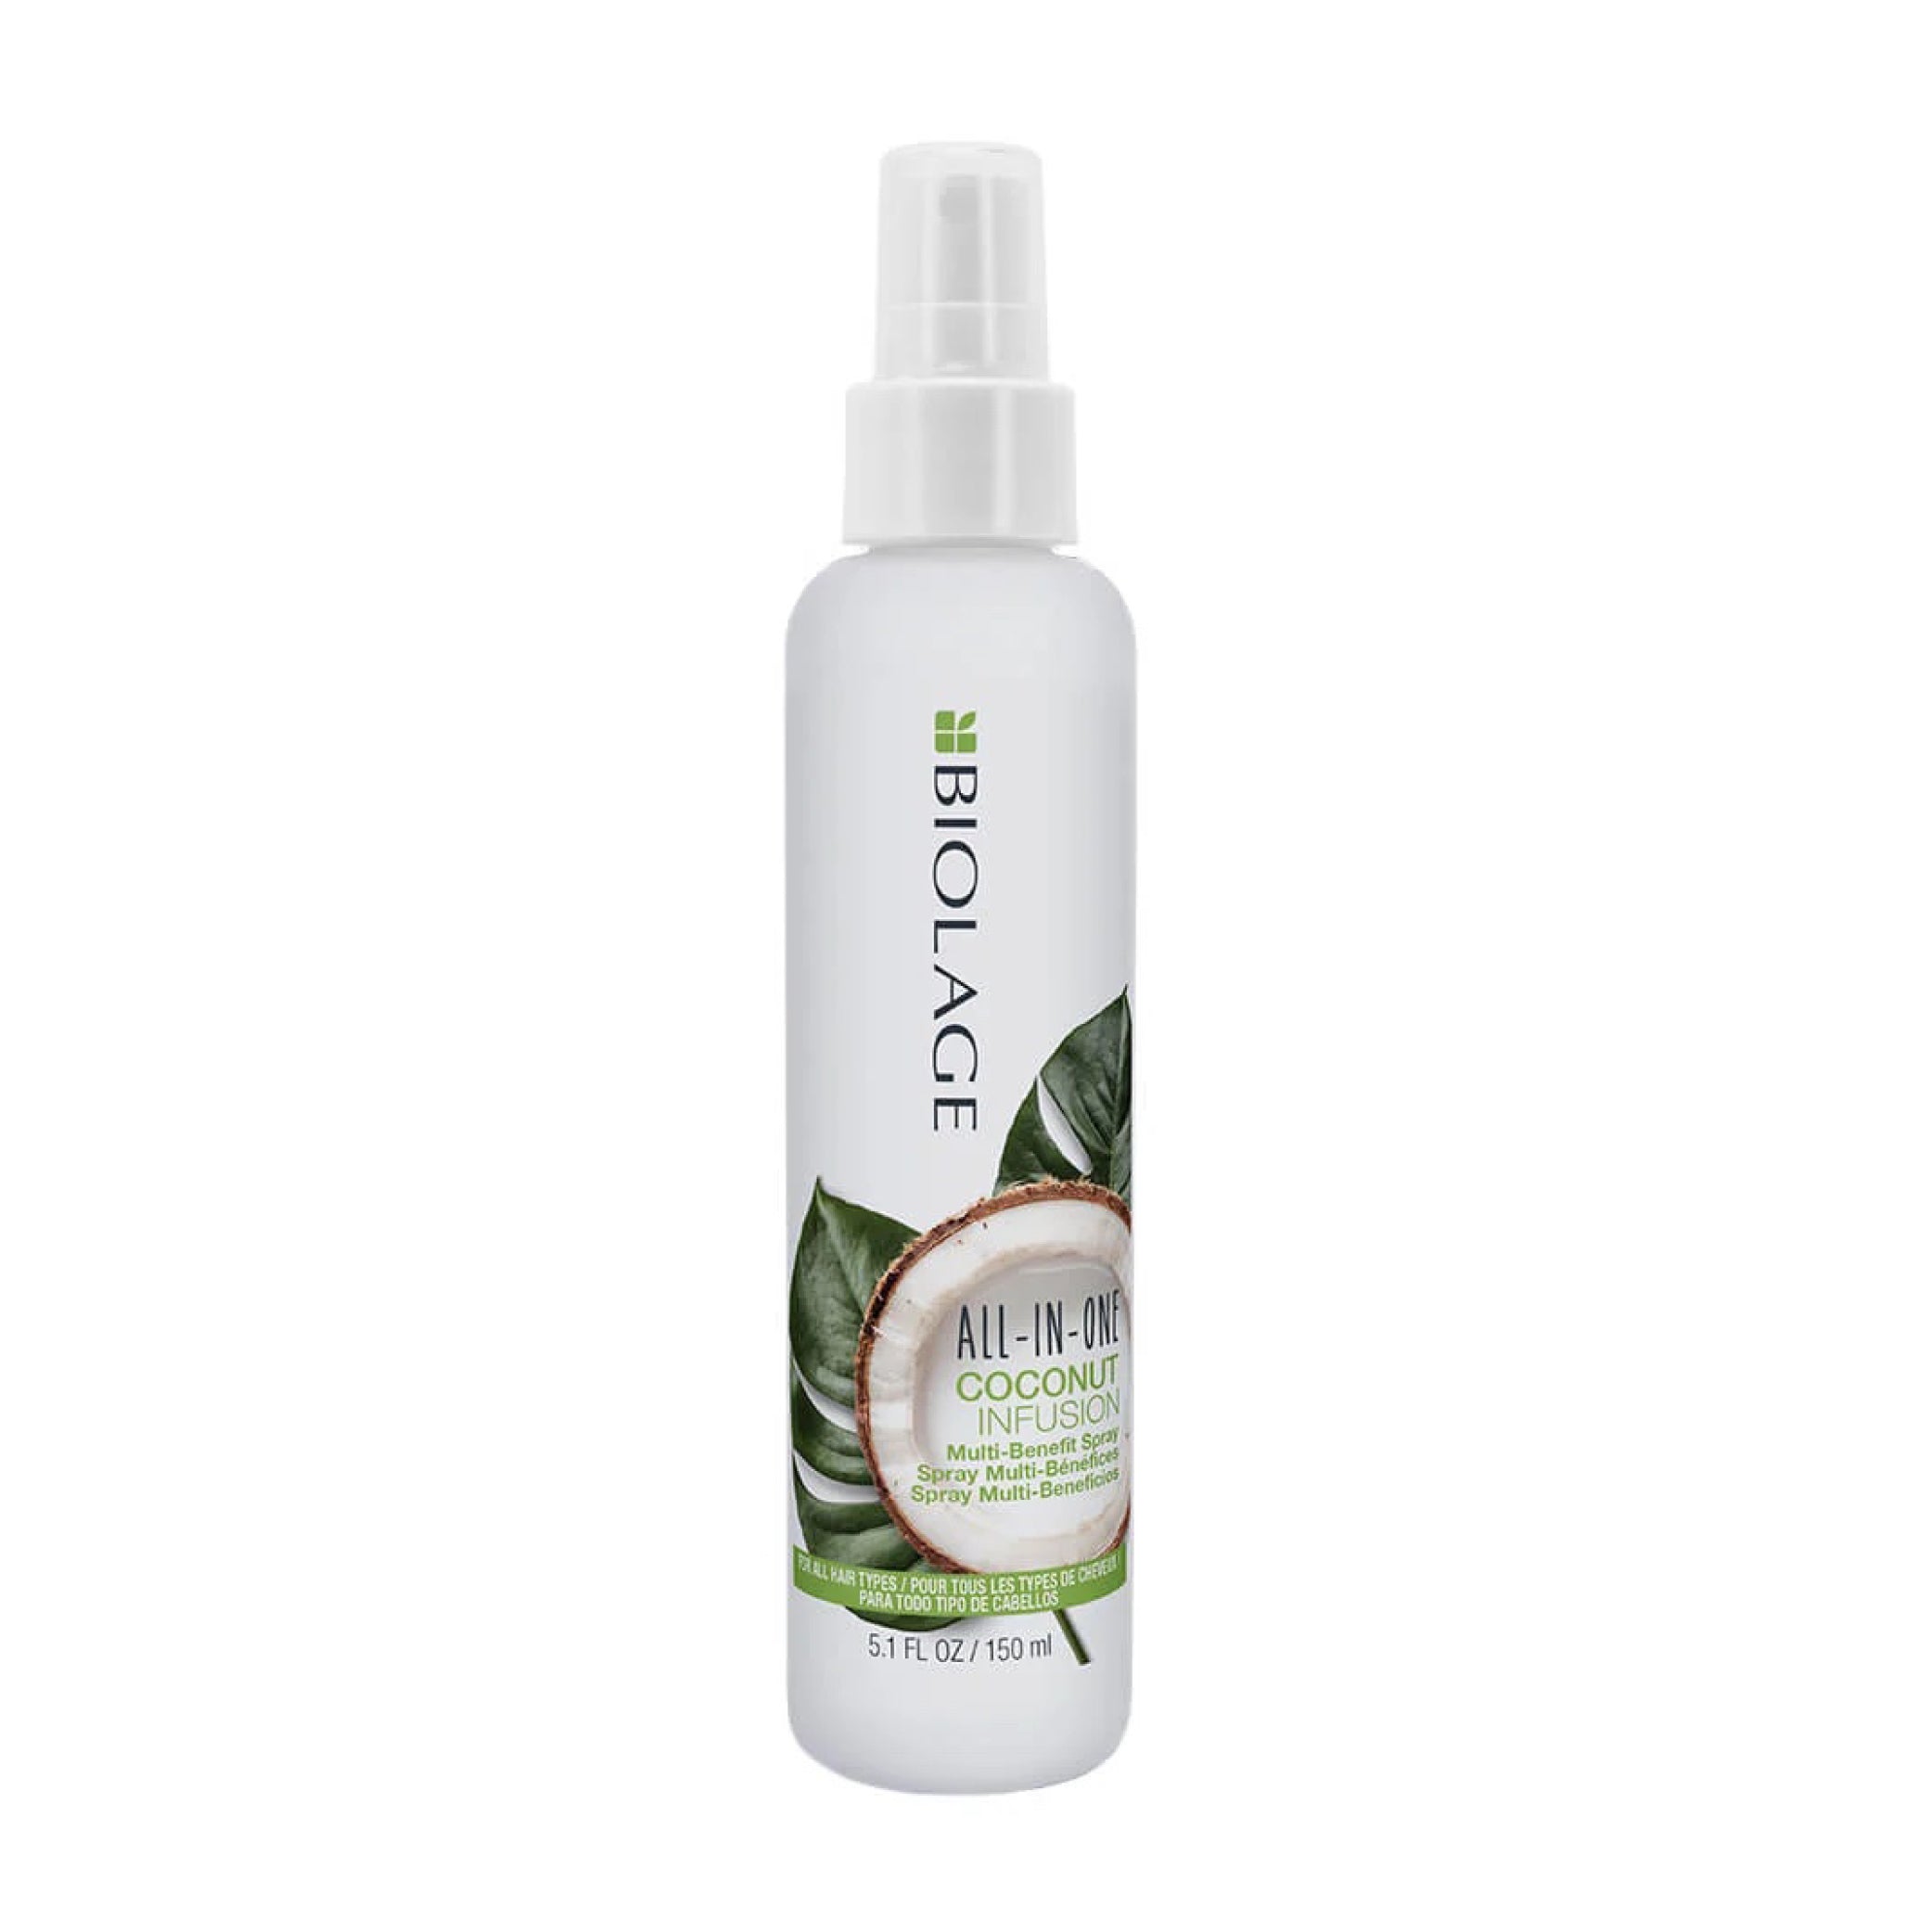 All-In-One Coconut Infusion Multi-Benefit Spray